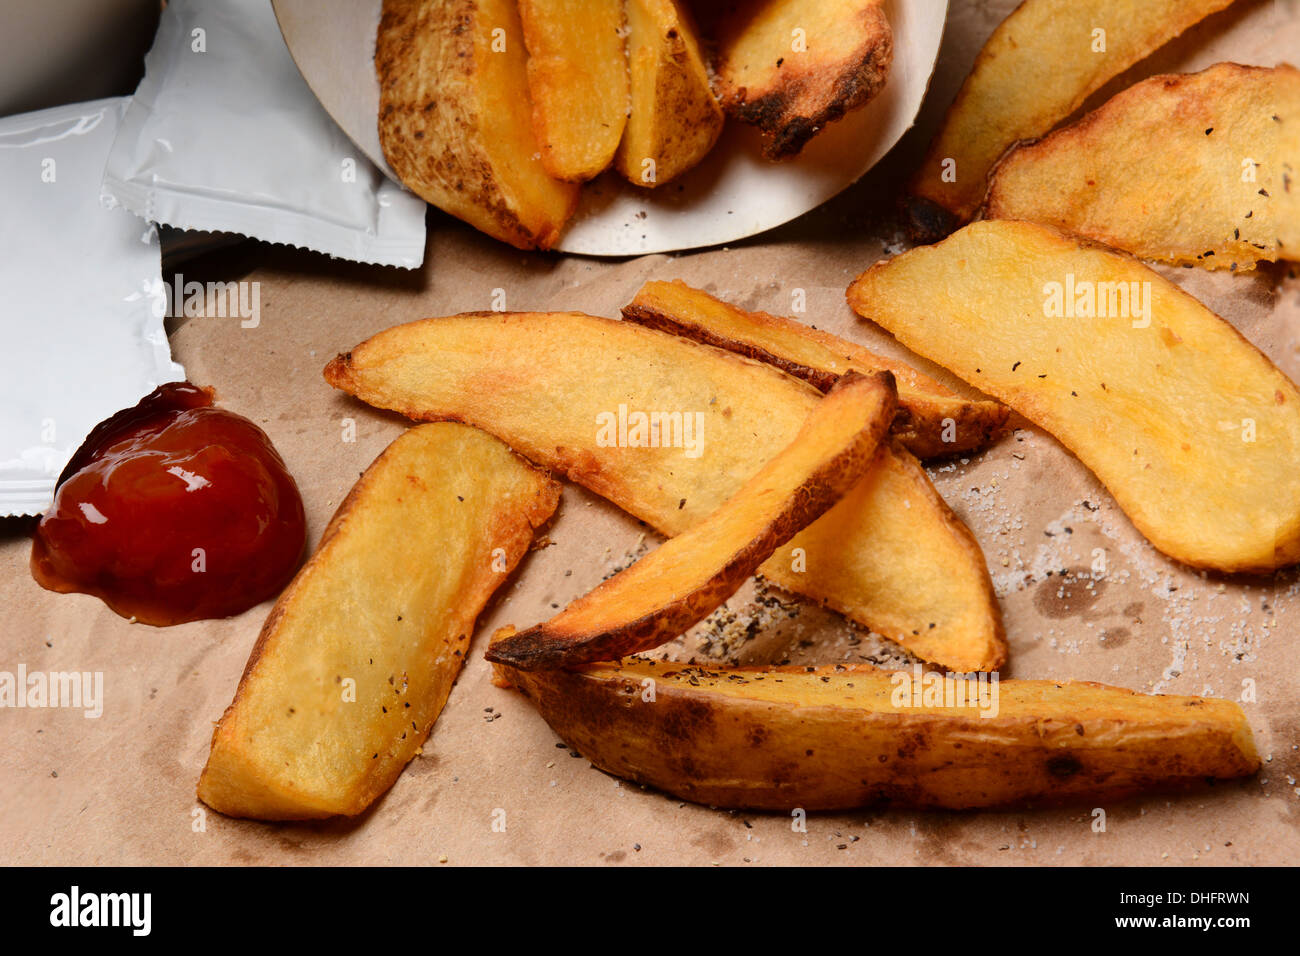 Closeup of some French Fries spilled onto a brown bag. Ketchup dollop and packets with salt and pepper. Stock Photo